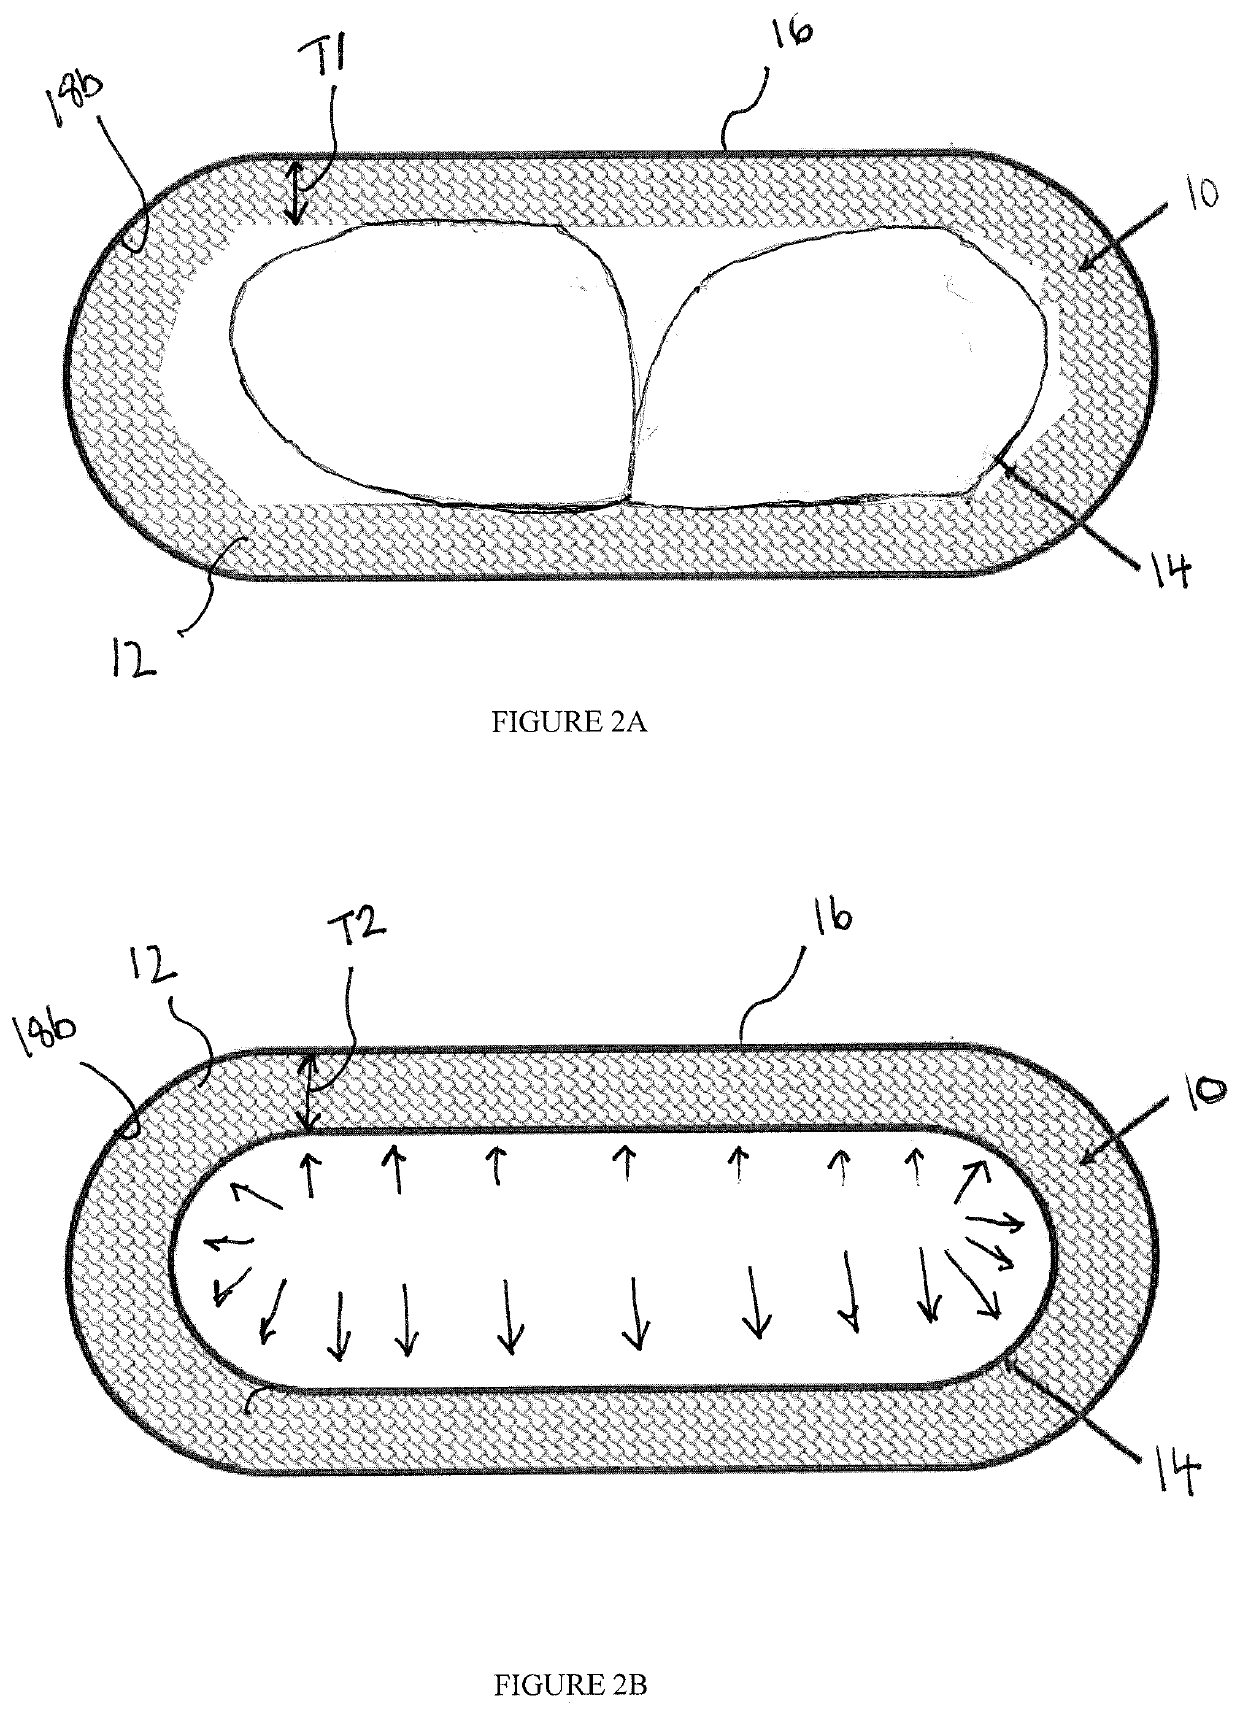 Methods and materials to universally fit duct liner insulation for oval HVAC duct systems